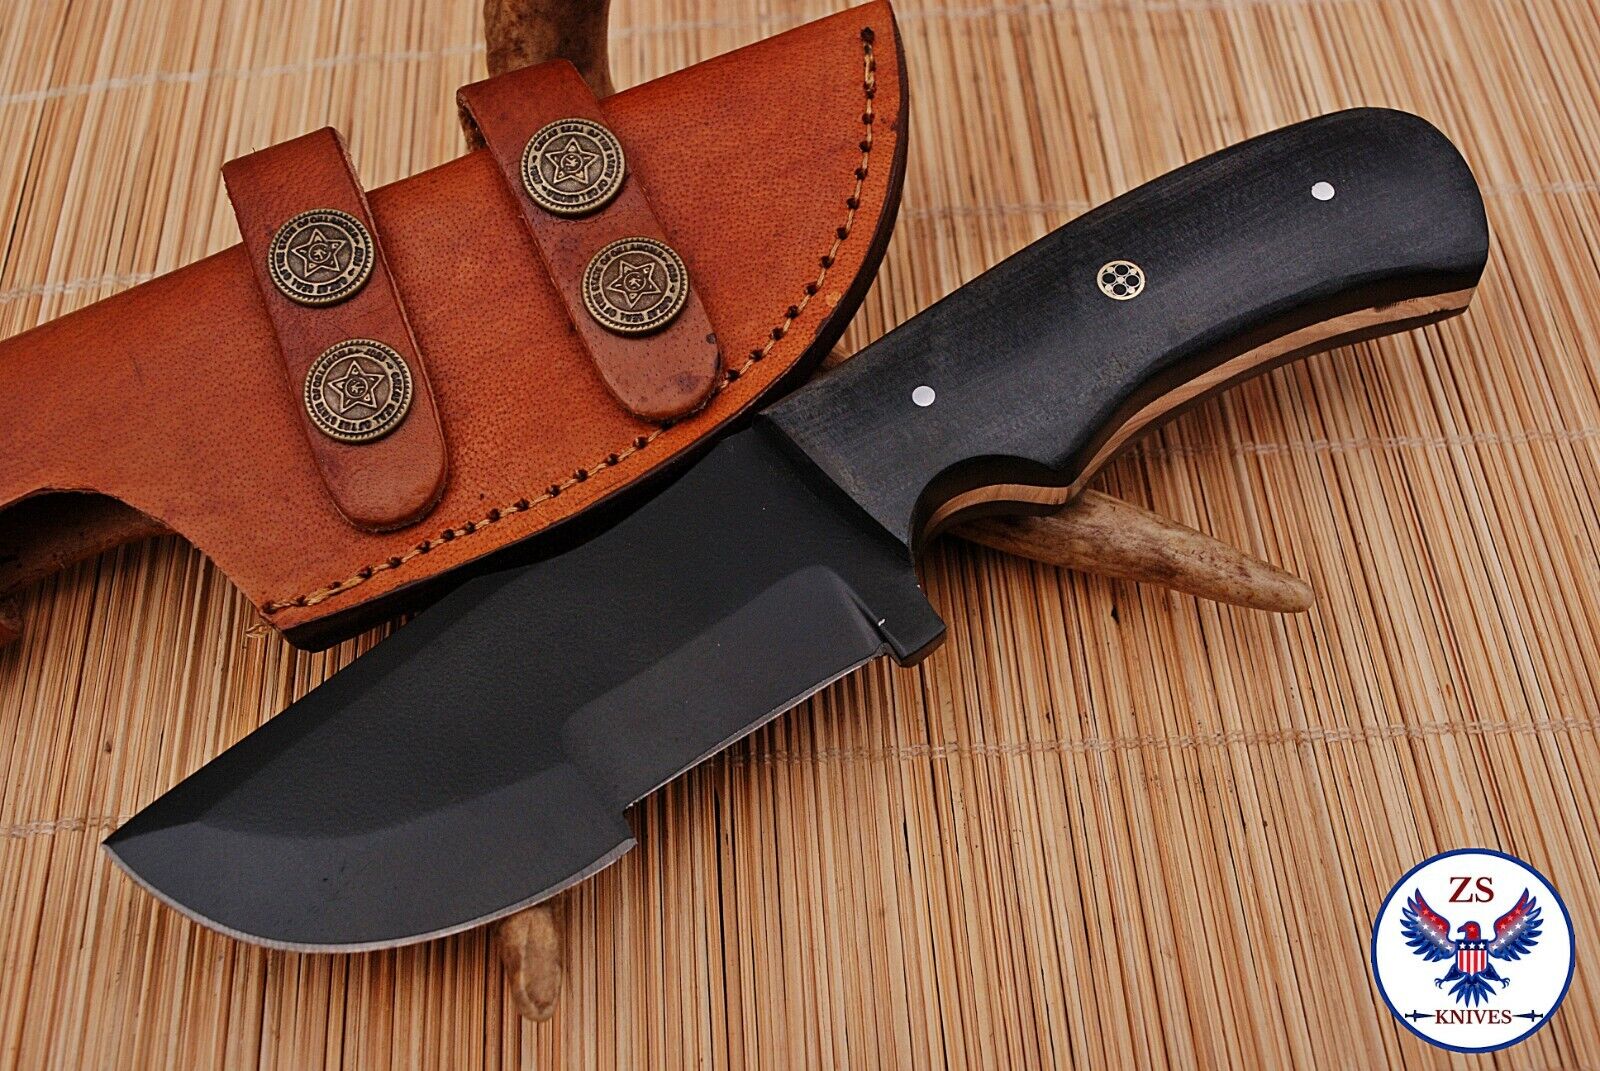 TRACKER 1095 CARBON STEEL TRACKER HUNTING KNIFE WITH MICARTA HANDLE - ZS 83